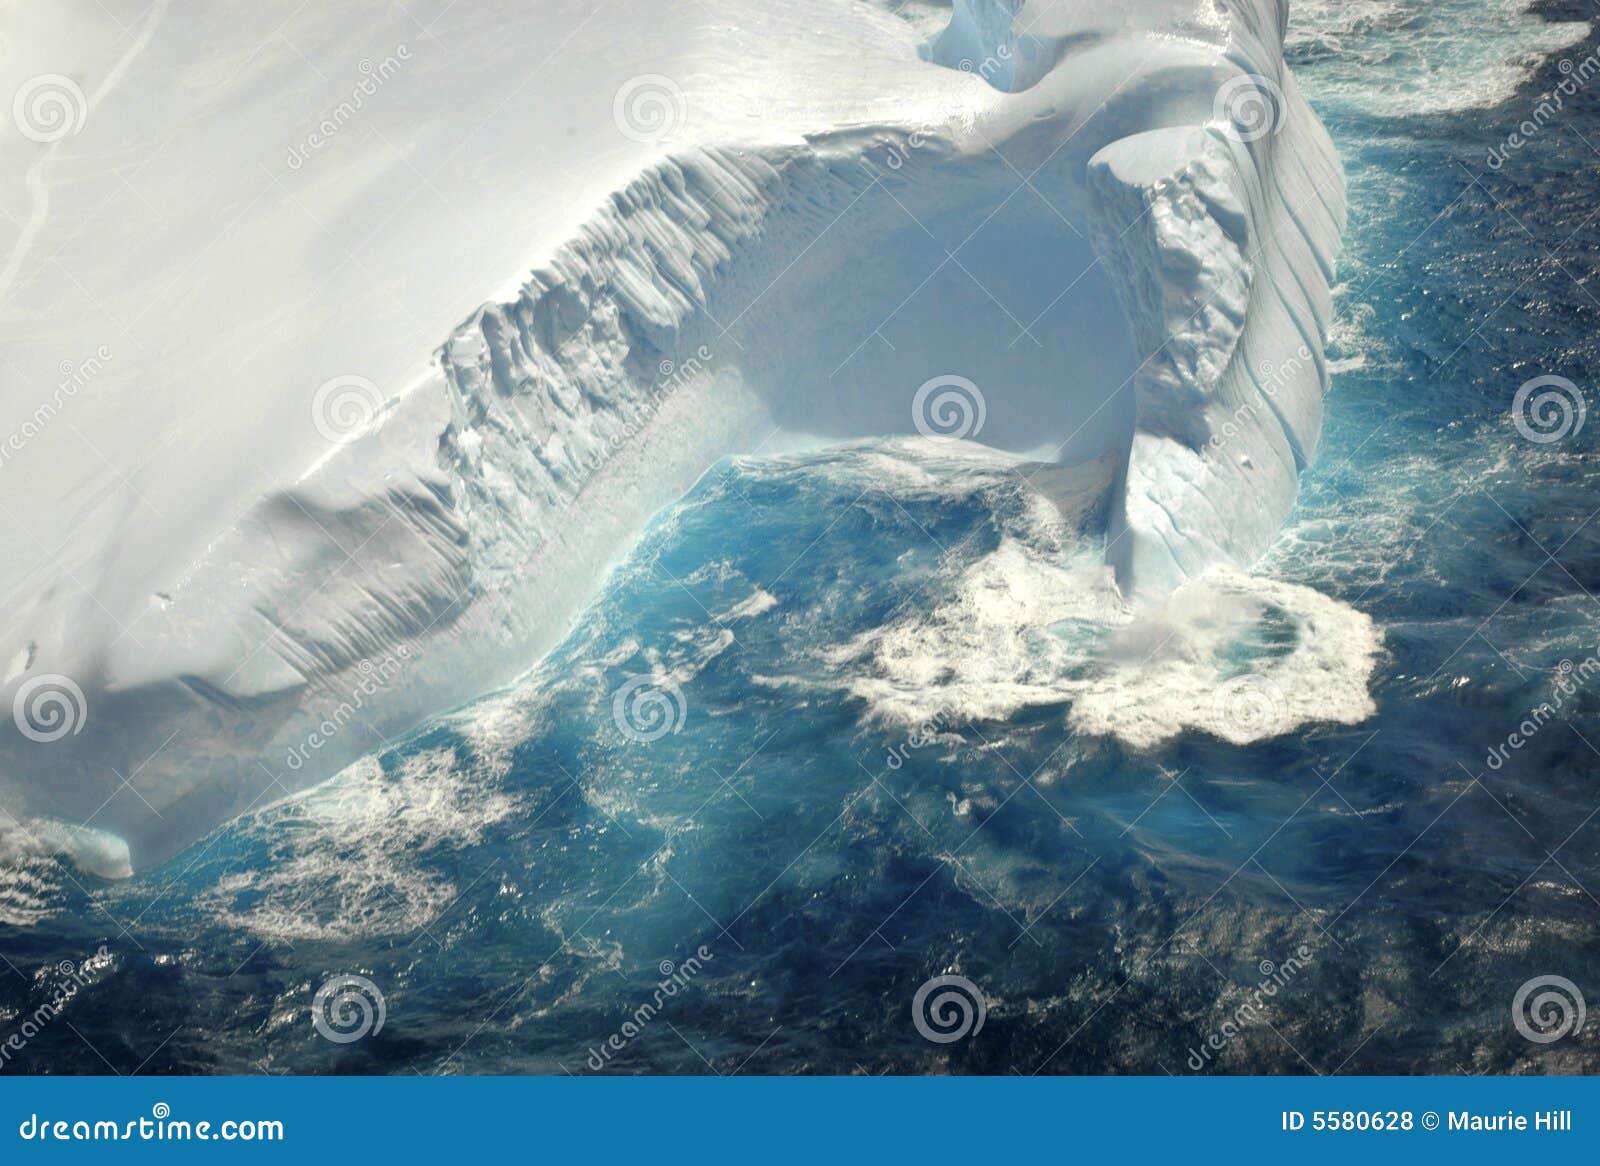 giant iceberg in the southern ocean